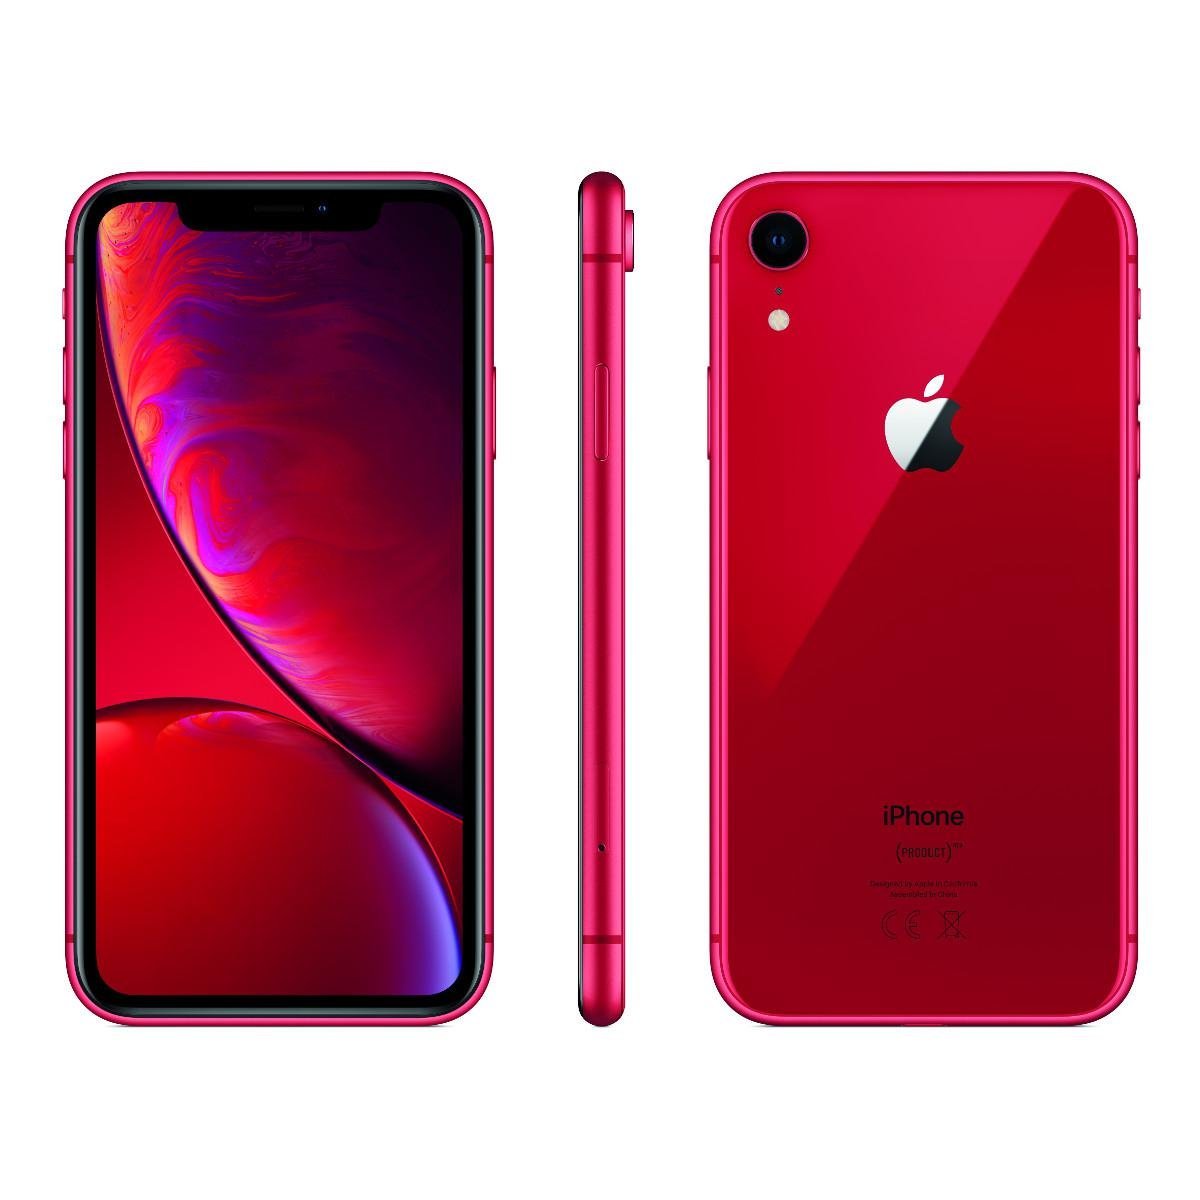 Apple iPhone XR 128GB in Red Prices Shop Deals Online 